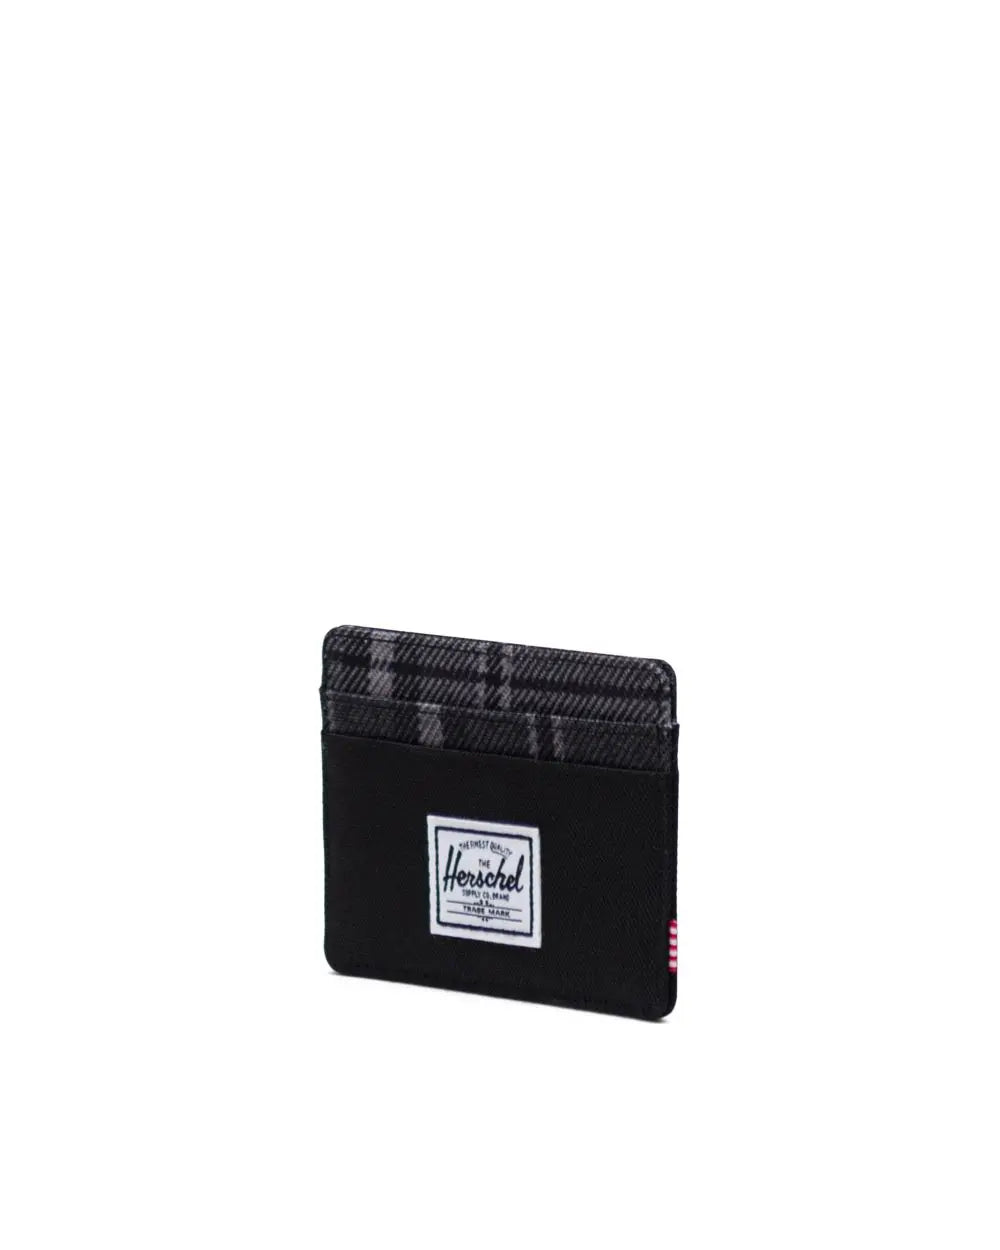 Roy Wallet - Black/Grayscale Plaid